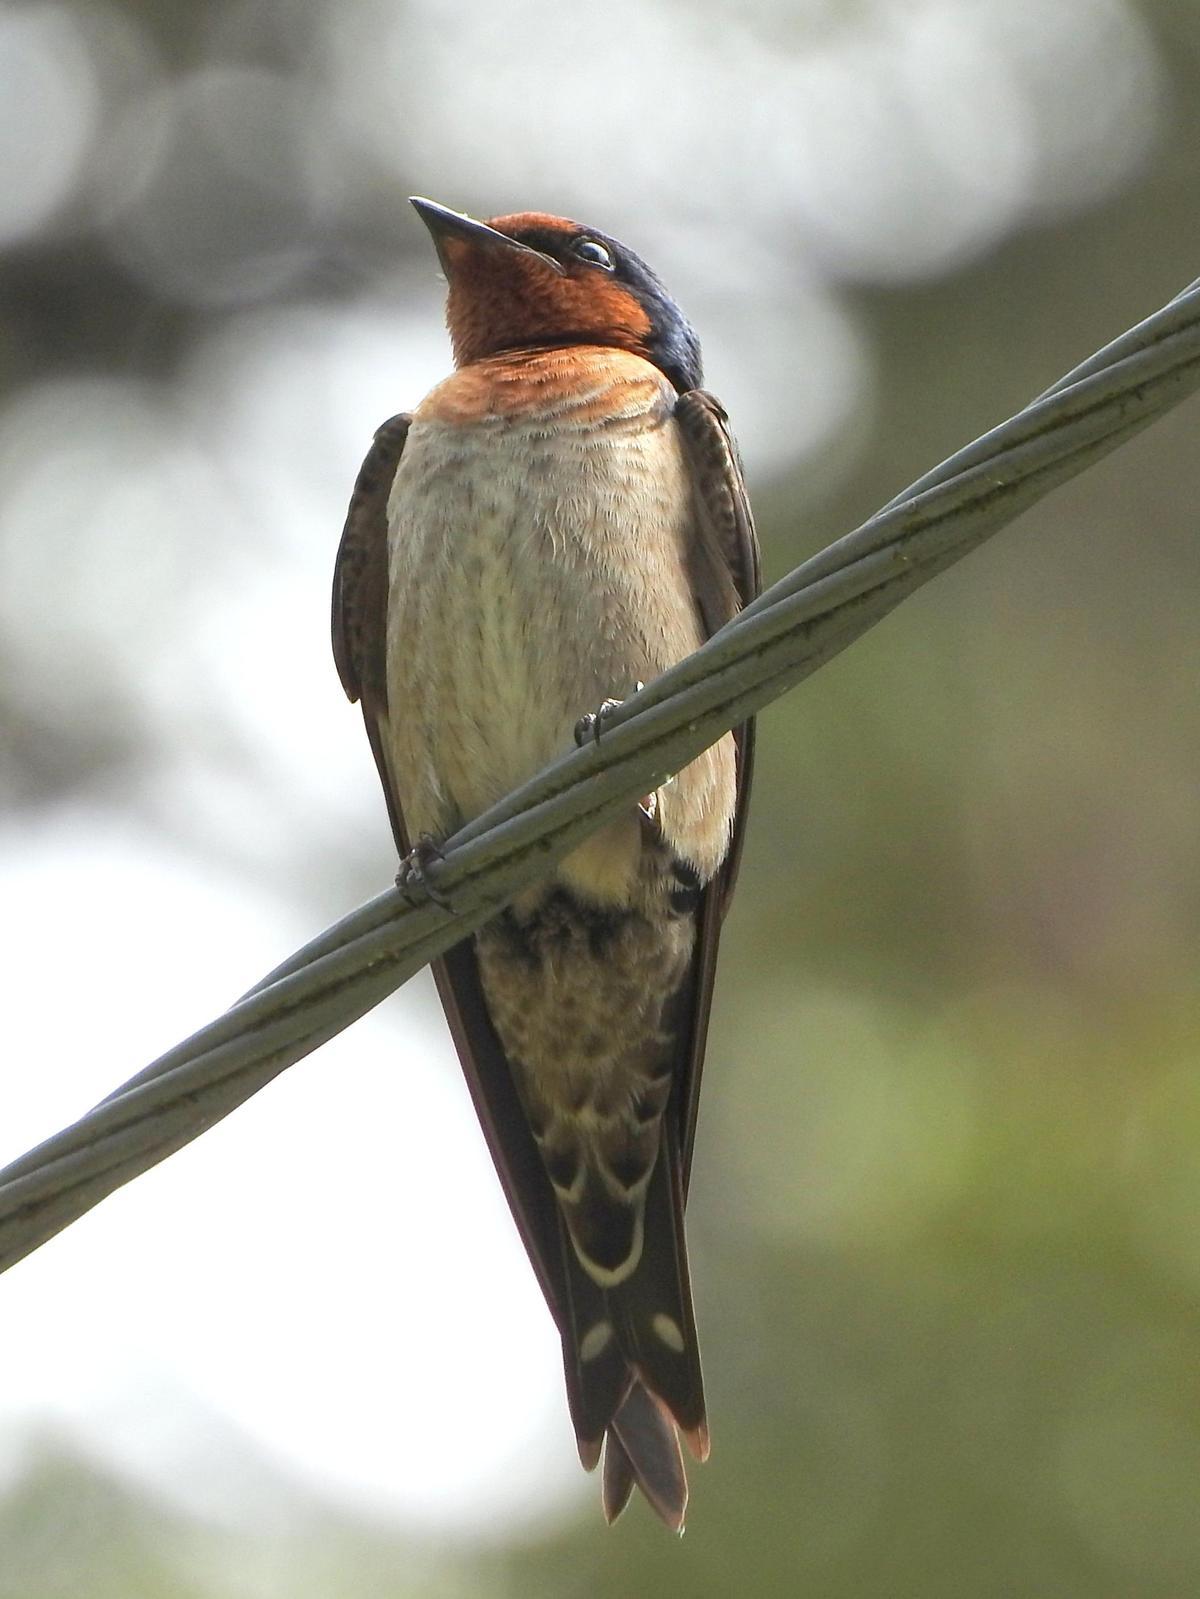 Pacific Swallow Photo by Todd A. Watkins